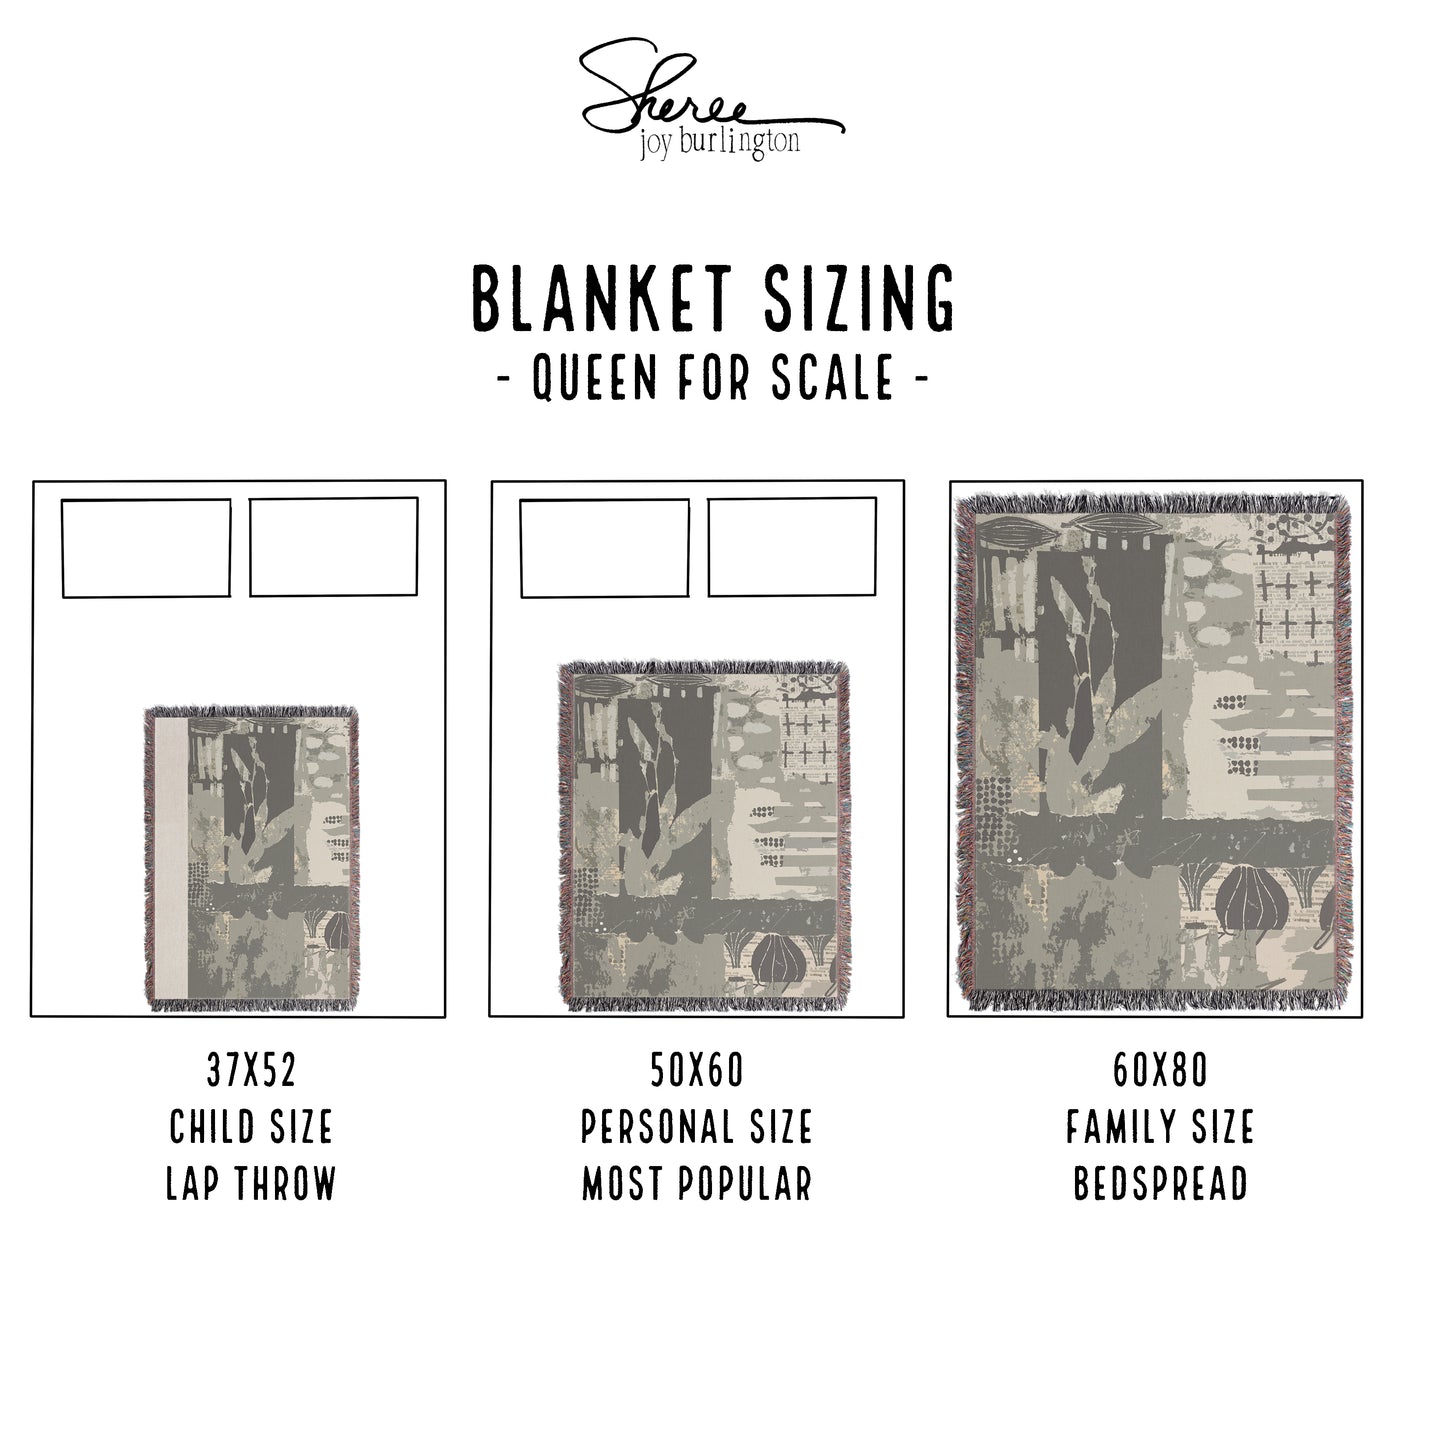 Personalized Woven Wedding Blanket Size Chart | Heart Icons design by Sheree Burlington